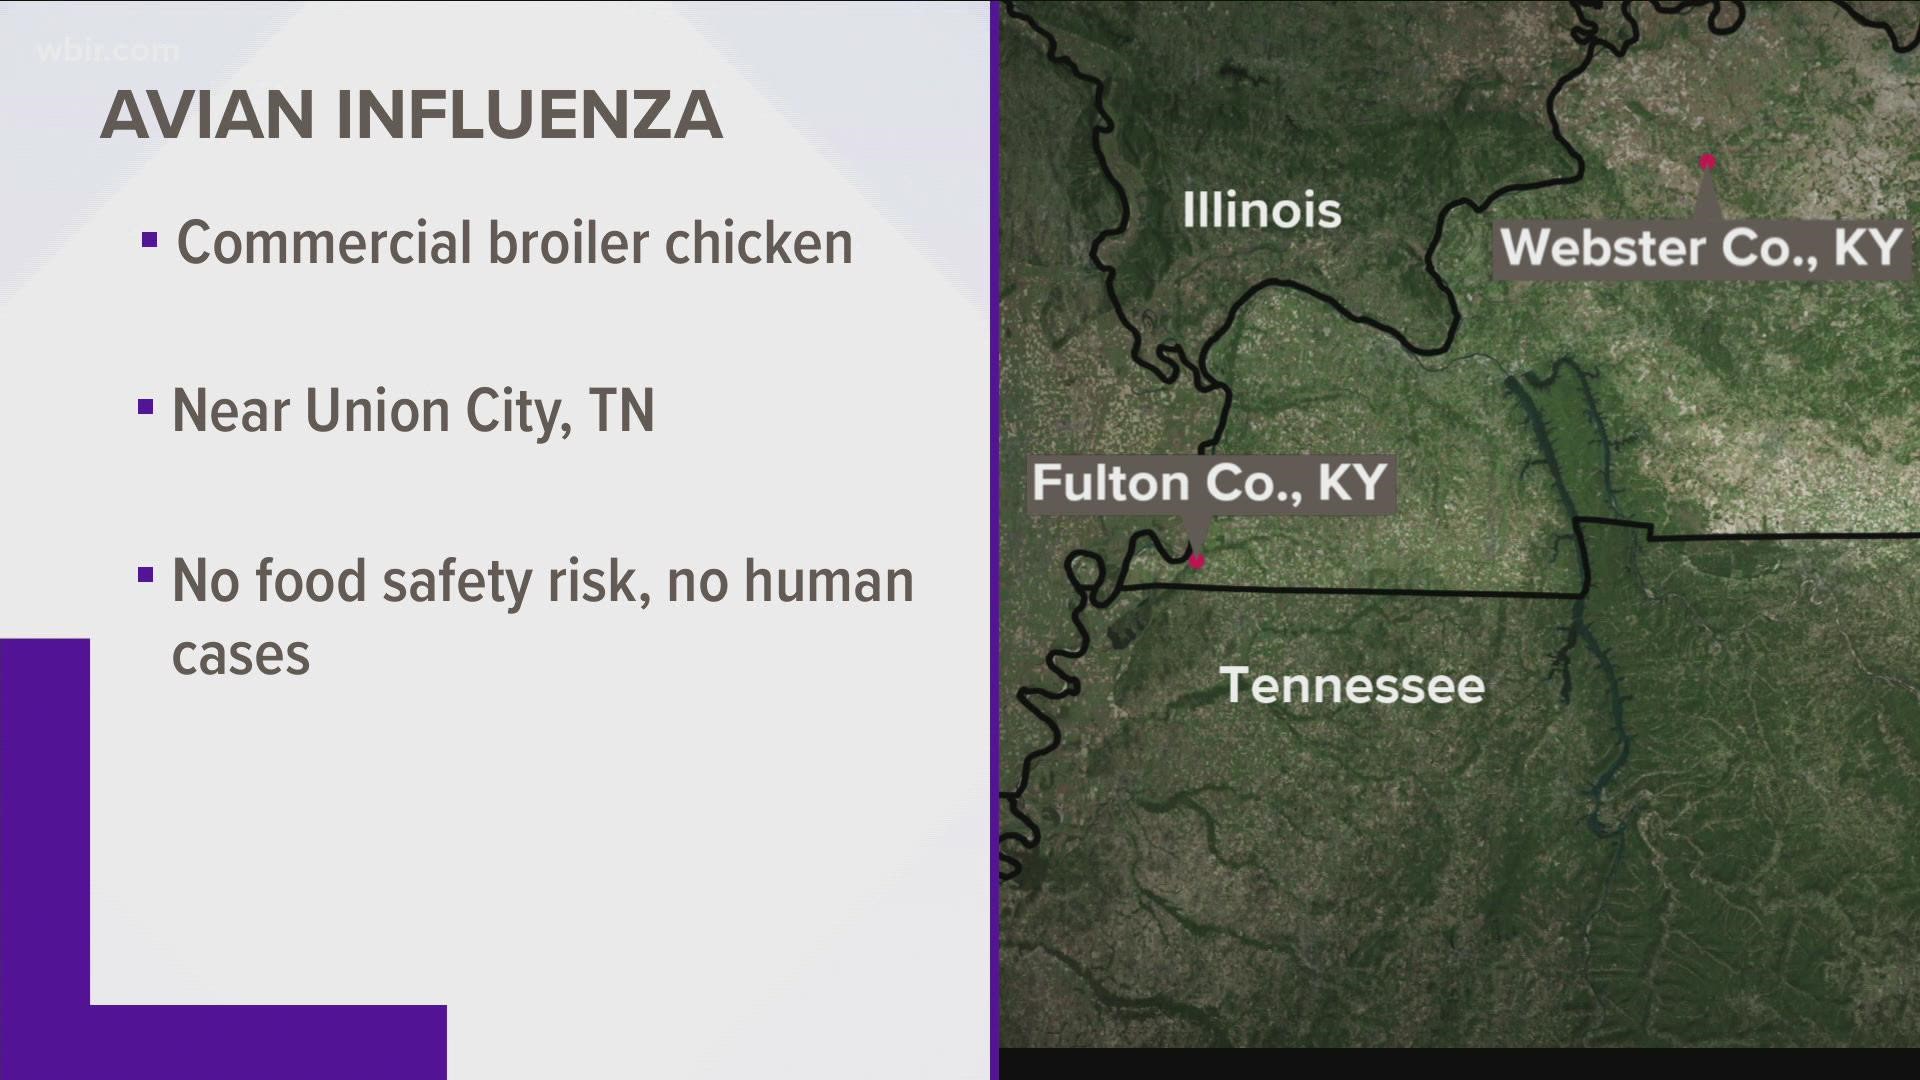 Authorities say the case was detected in a flock of commercial broiler chickens in Fulton County, just across the state line with Tennessee.